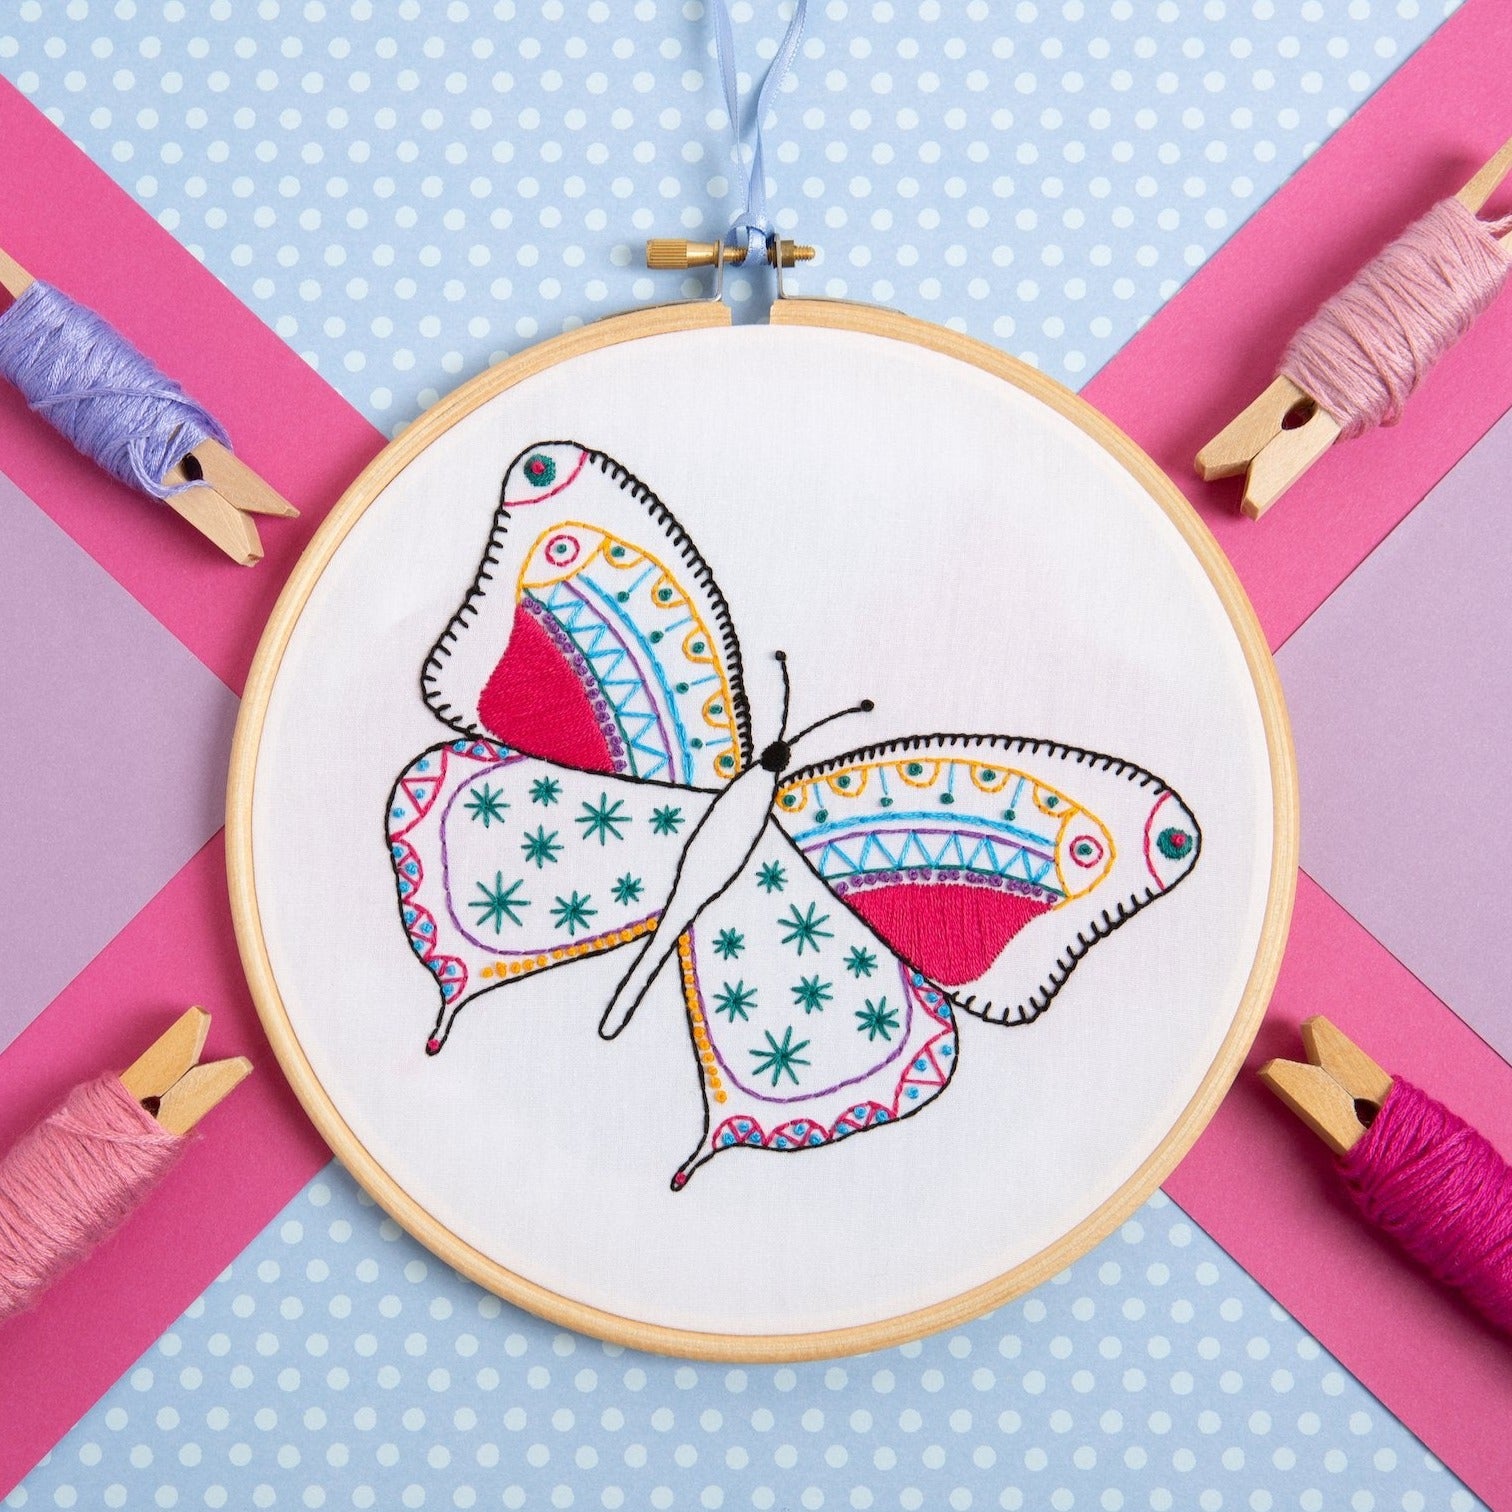 Butterfly Embroidery Kit – Hawthorn Handmade